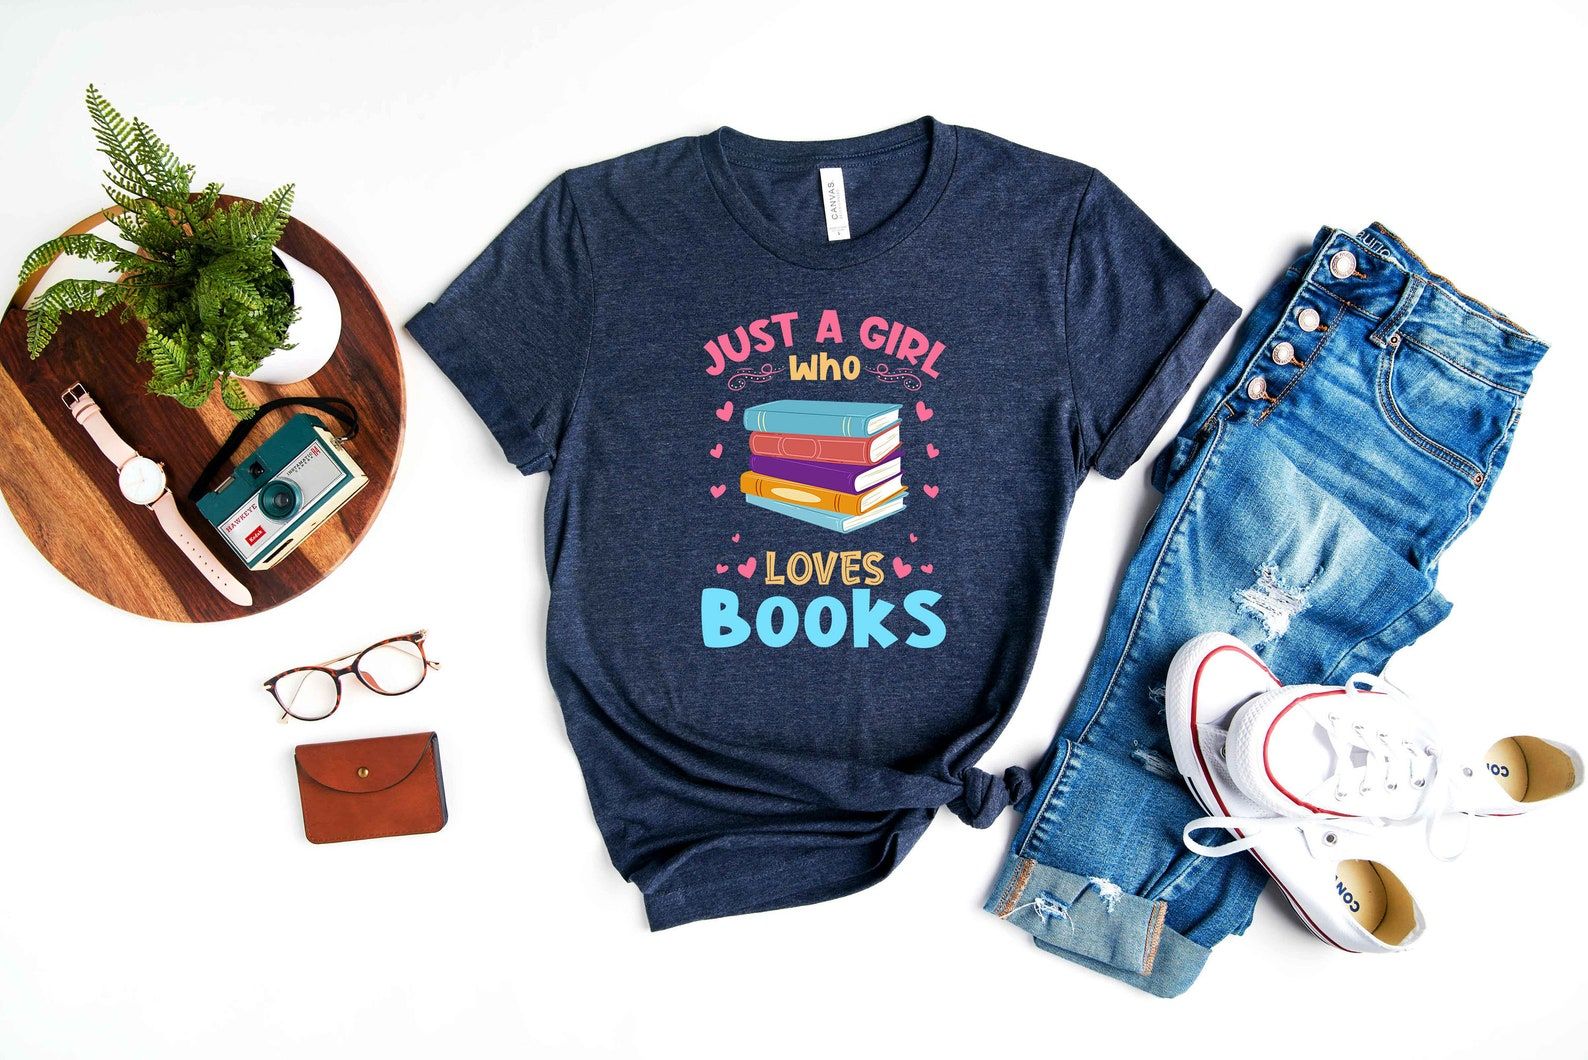 A flatlay centered around a navy t-shirt that reads "Just a girl who loves books" with colorful book spines and hearts, surrounded by jeans, sneakers, glasses, a watch and camera and a wallet.